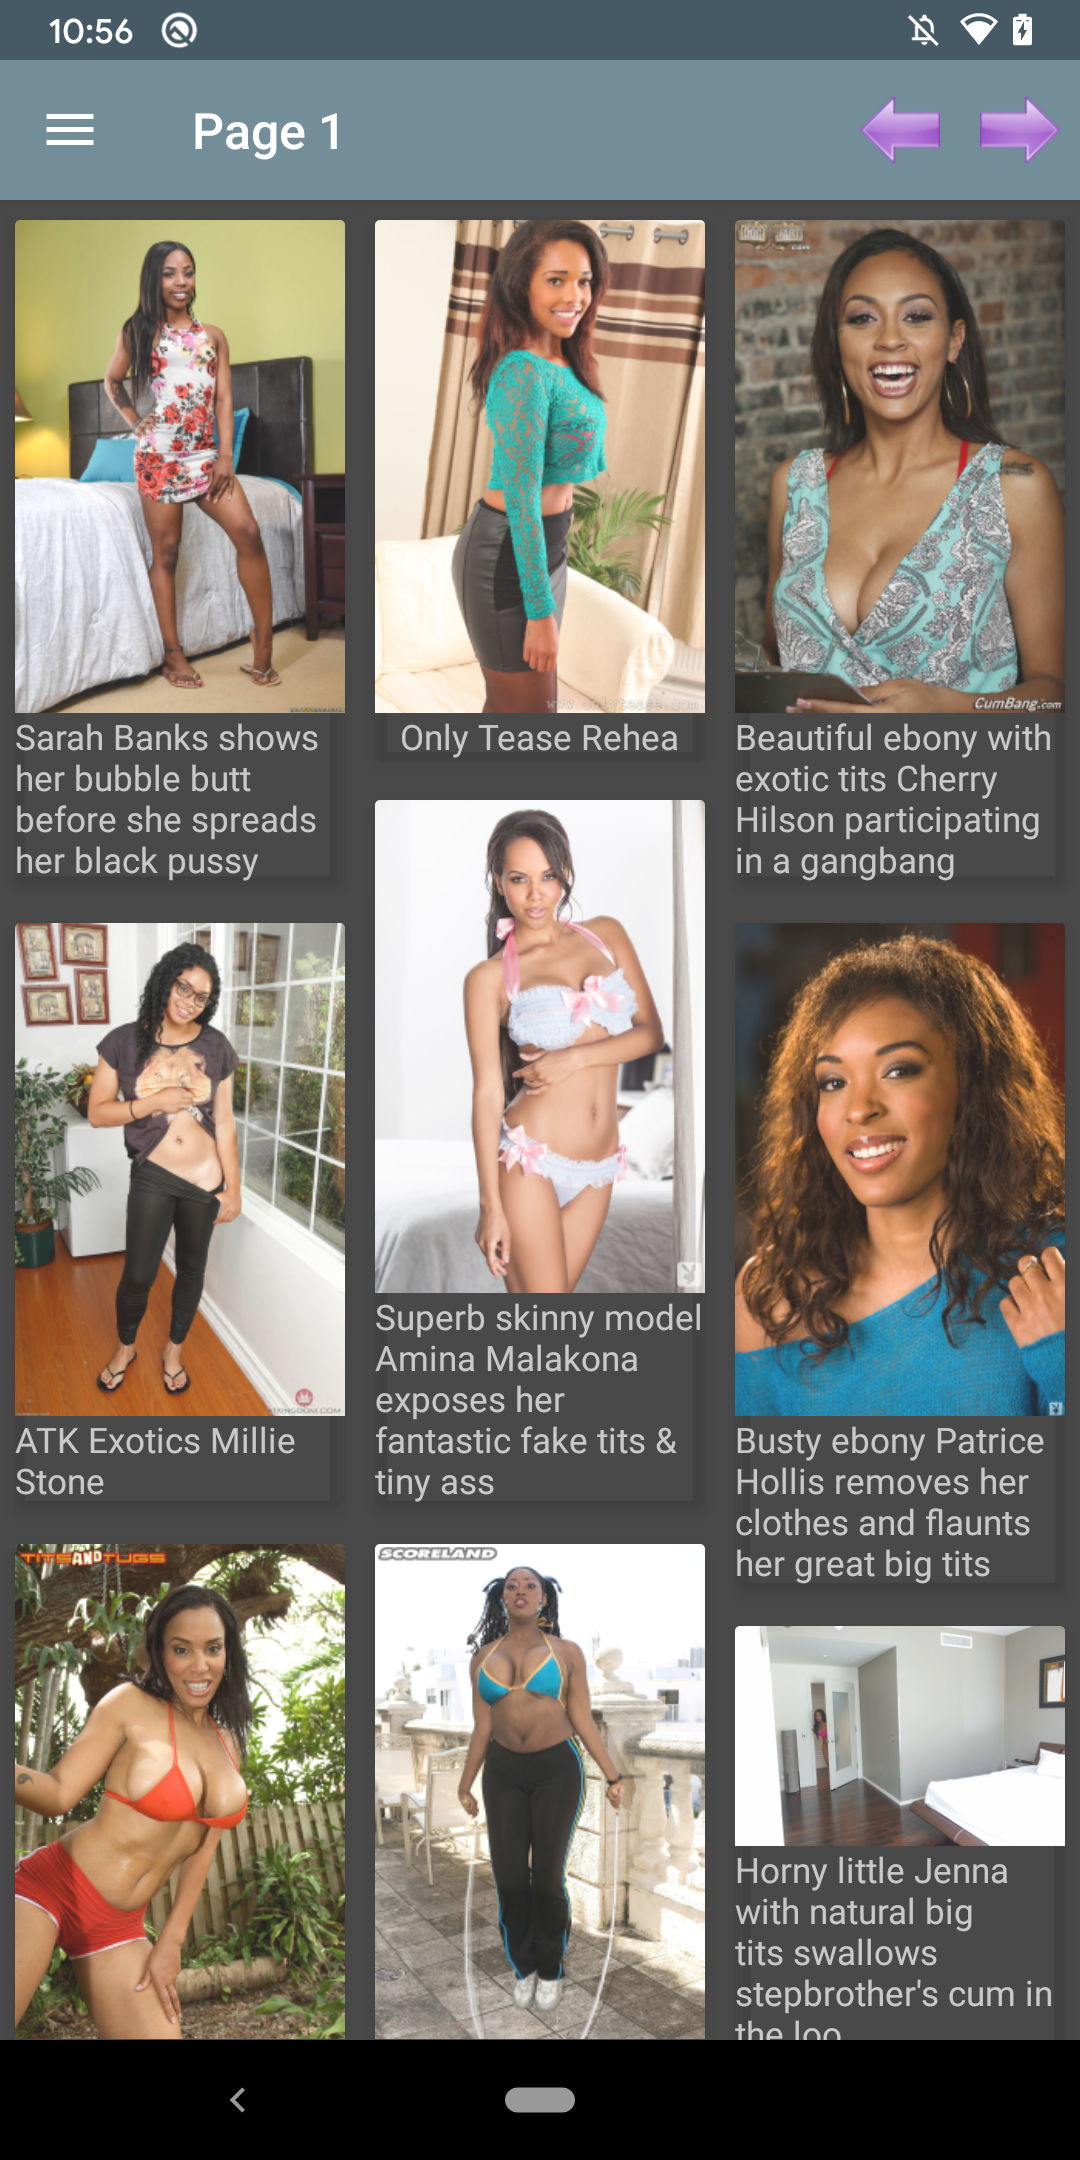 Ebony galleries porn,ecchi,hentia,lisa,ann,apps,apk,wallpaper,hemtai,pictures,pic,app,download,anime,hot,images,photo,star,hentai,sexy,galleries,editor